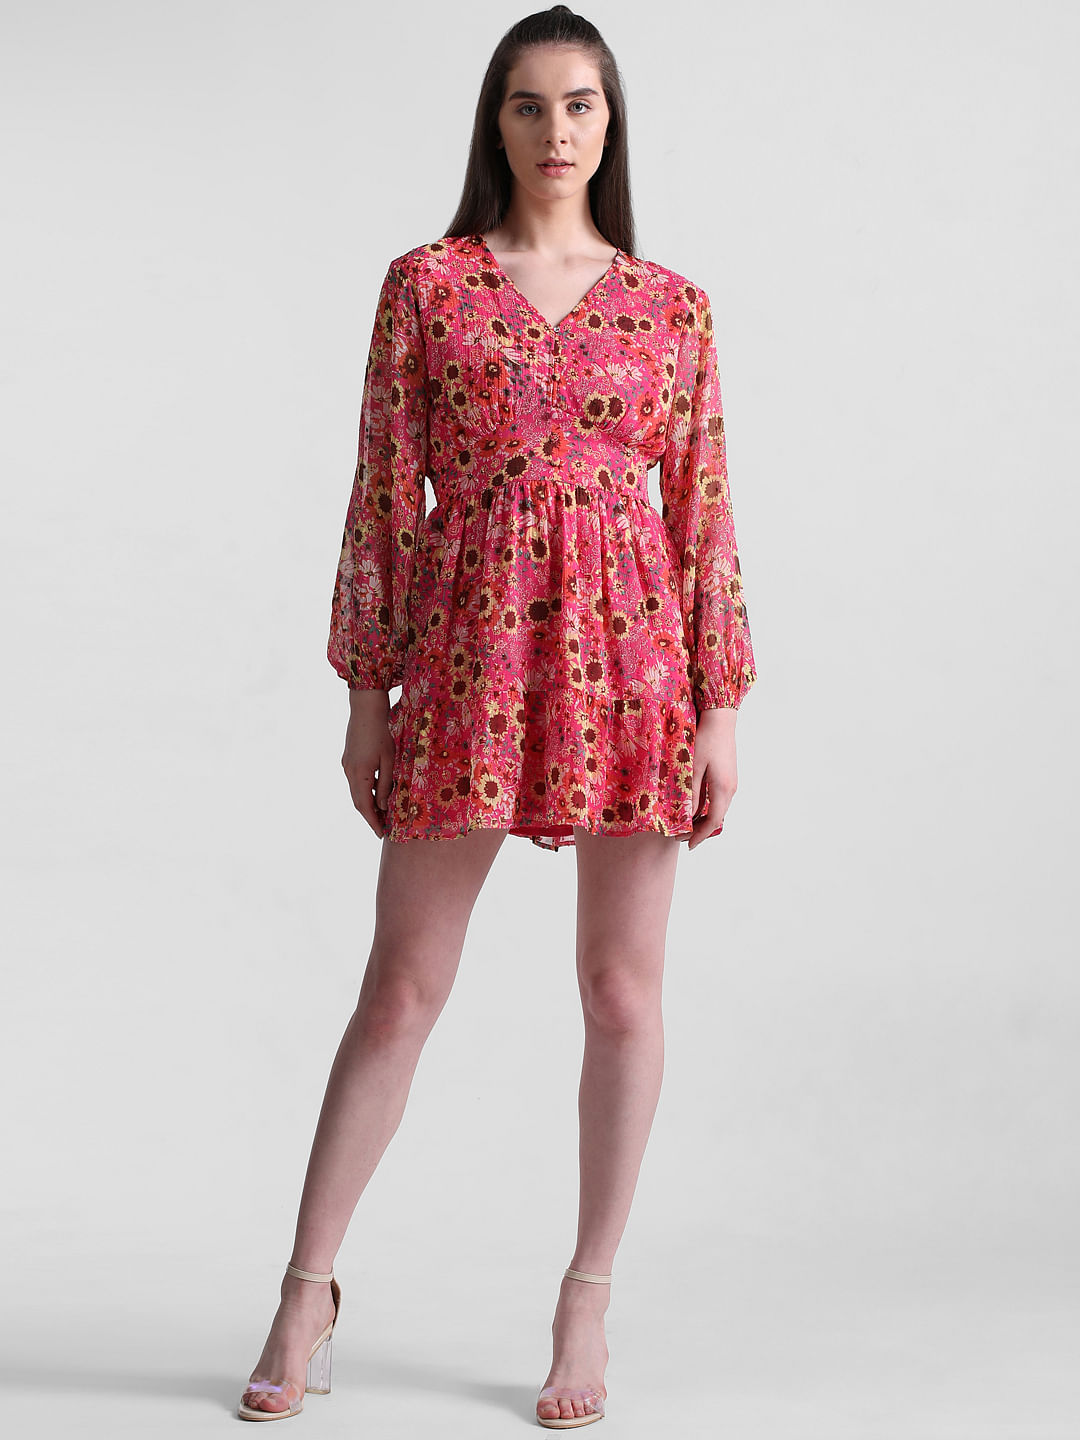 White and red floral dress by Prints Valley | The Secret Label